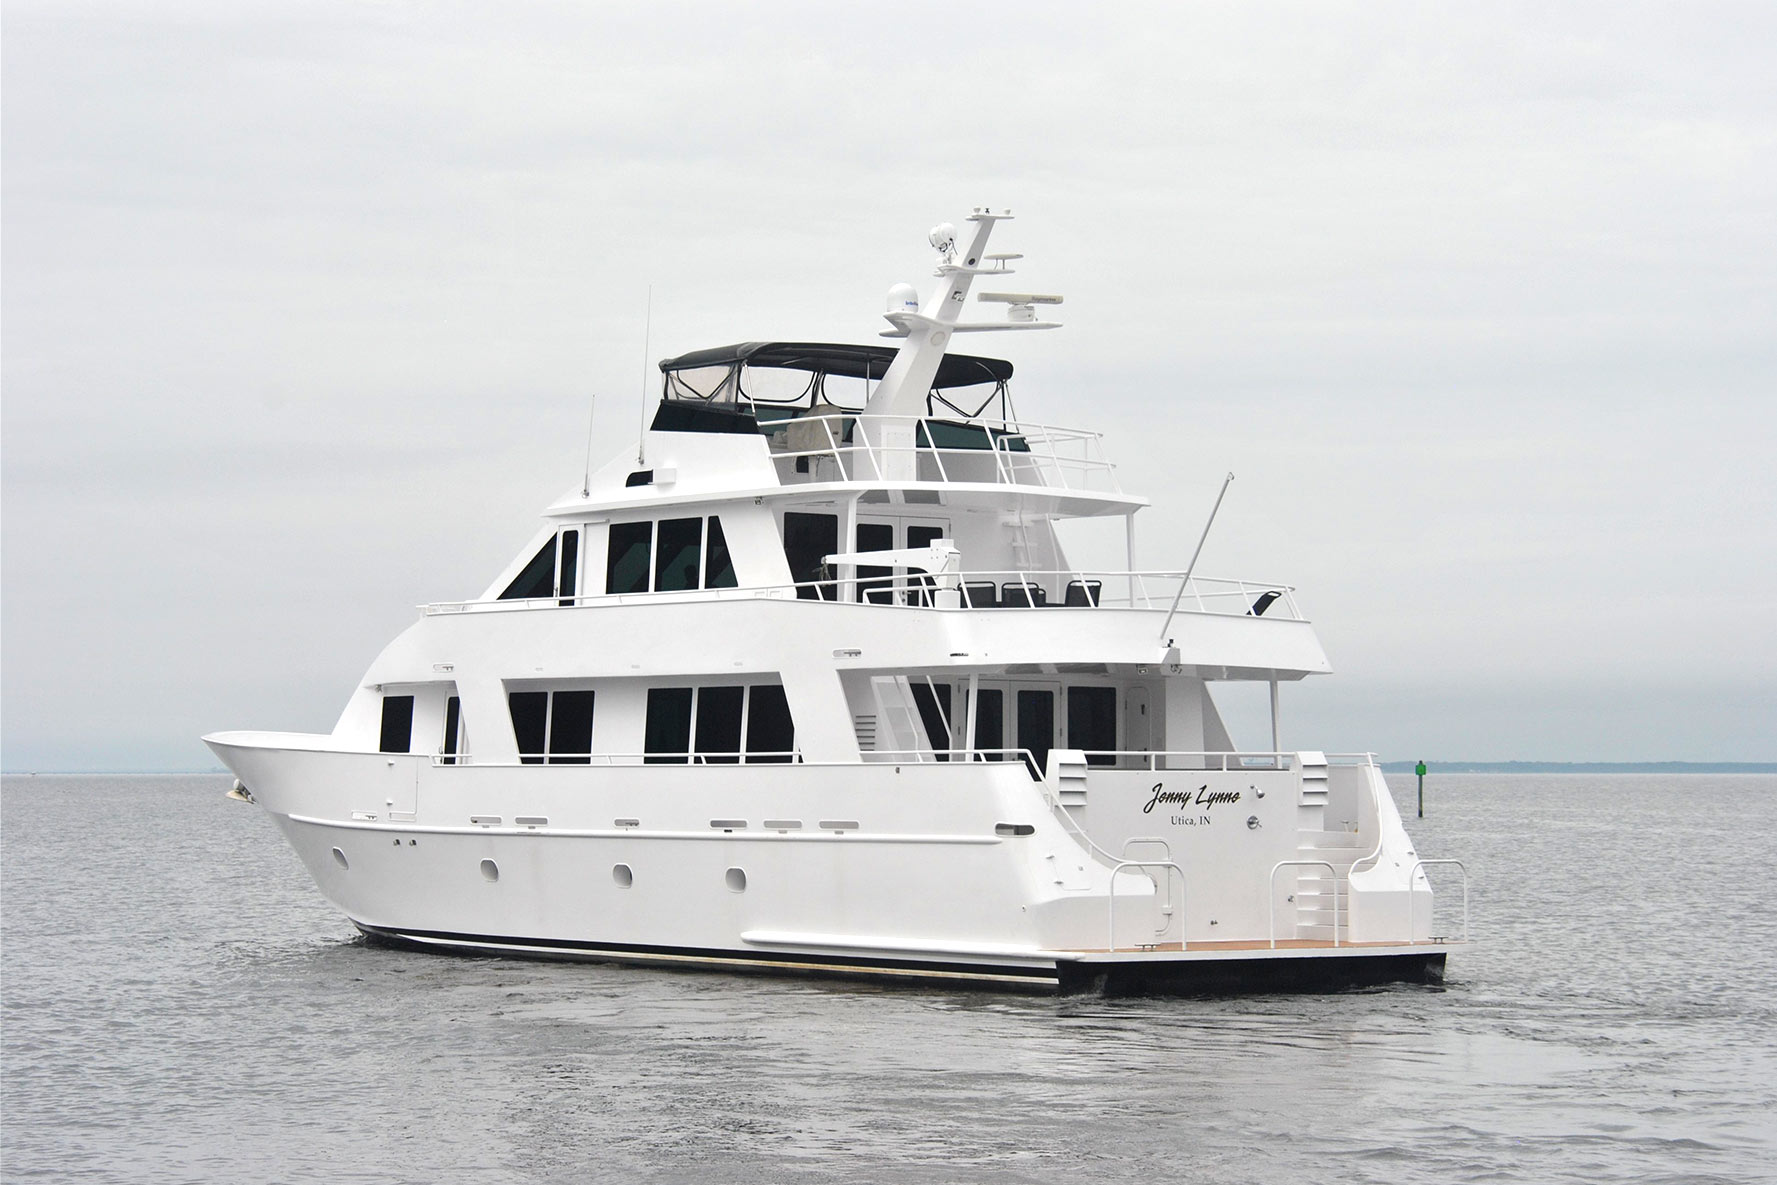 Jenny Lynne 87 Voyager - Luxury Yacht Sailing, Closer View